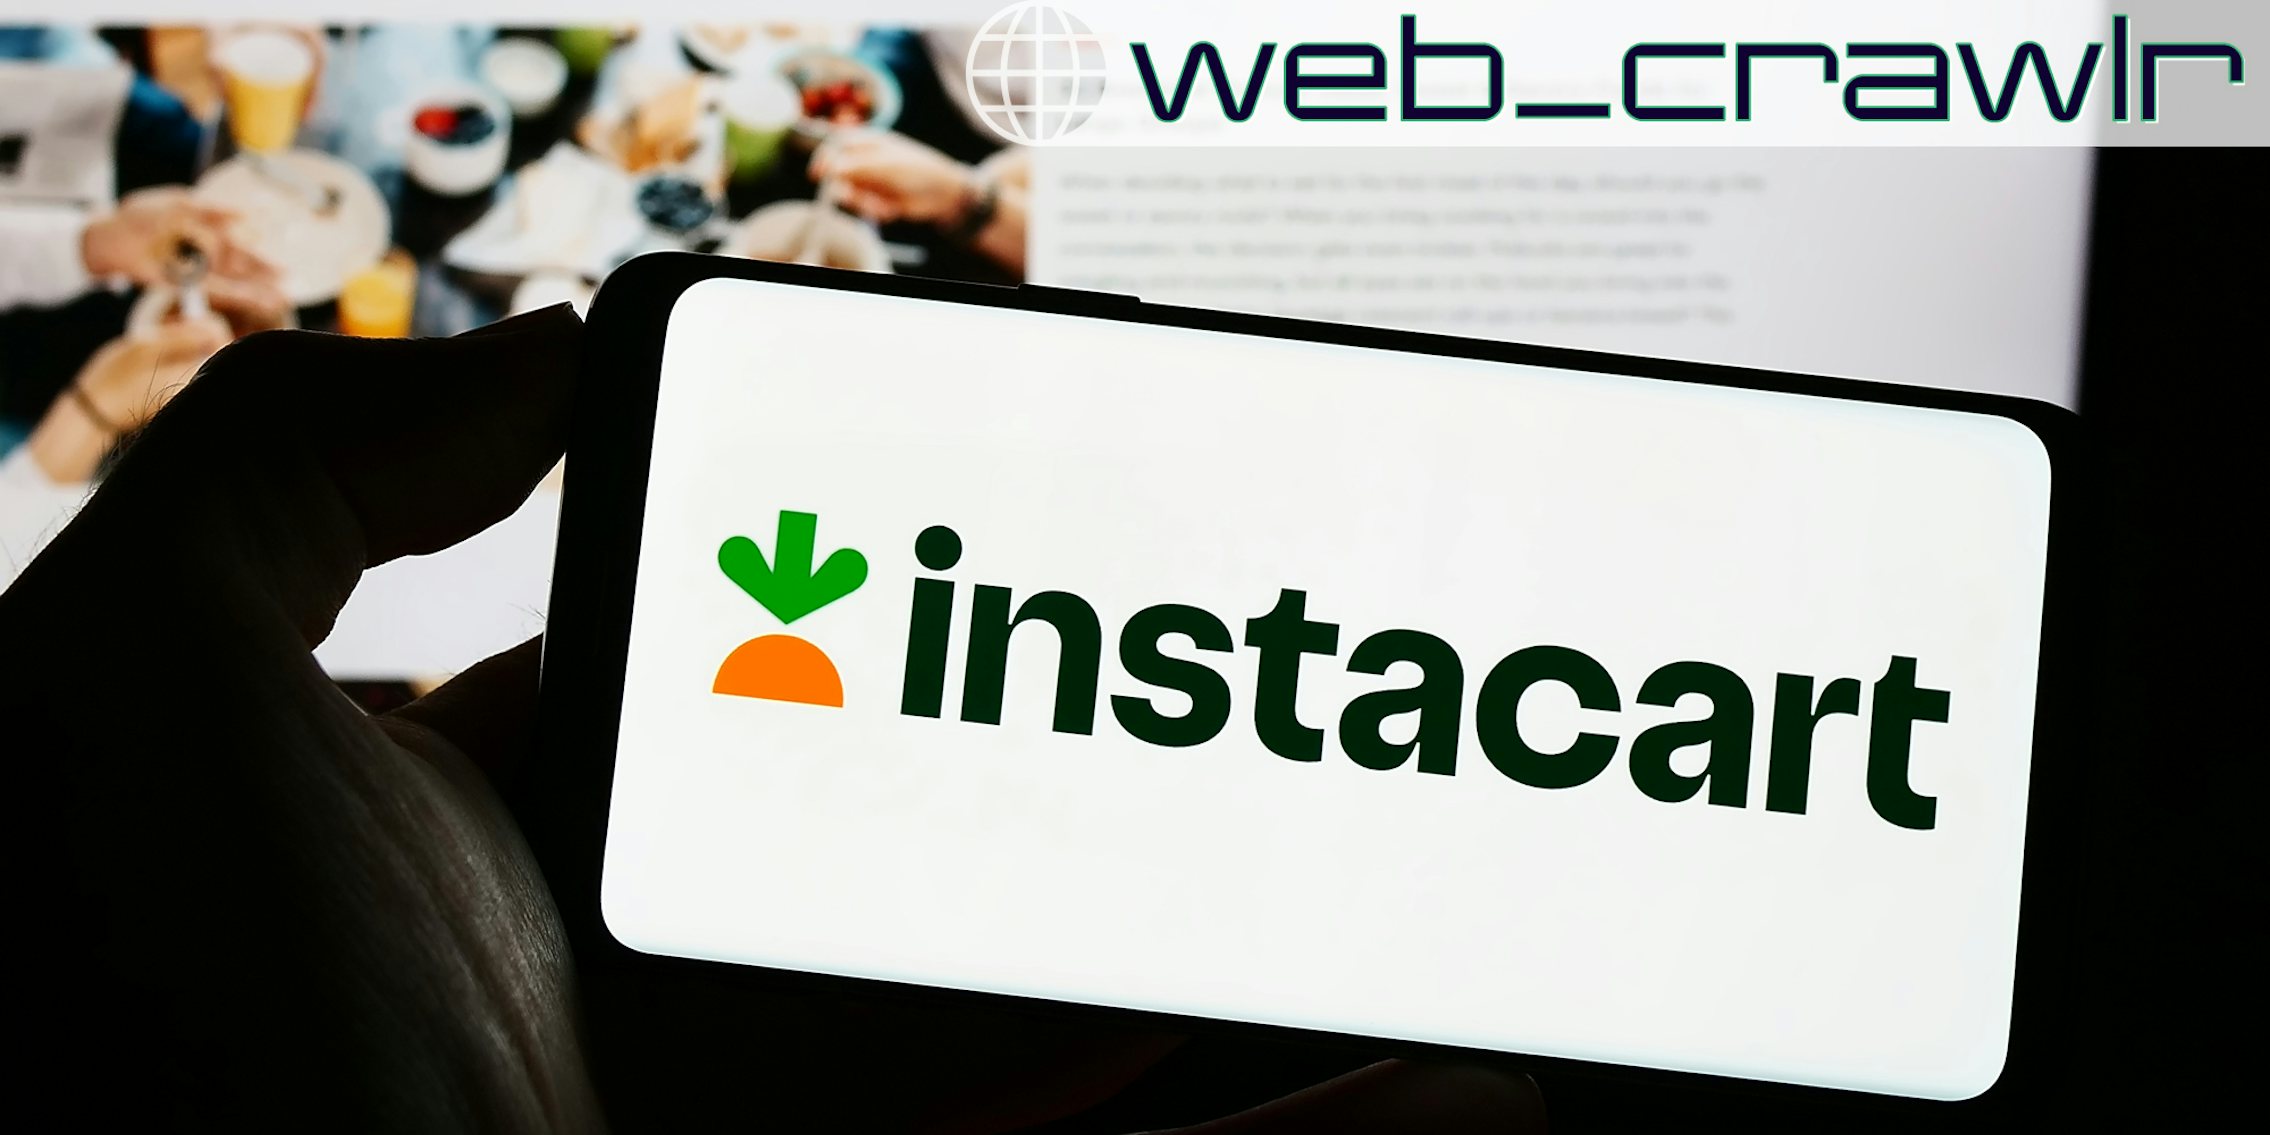 A person holding a phone with the Instacart logo on it. The Daily Dot newsletter web_crawlr logo is in the top right corner.